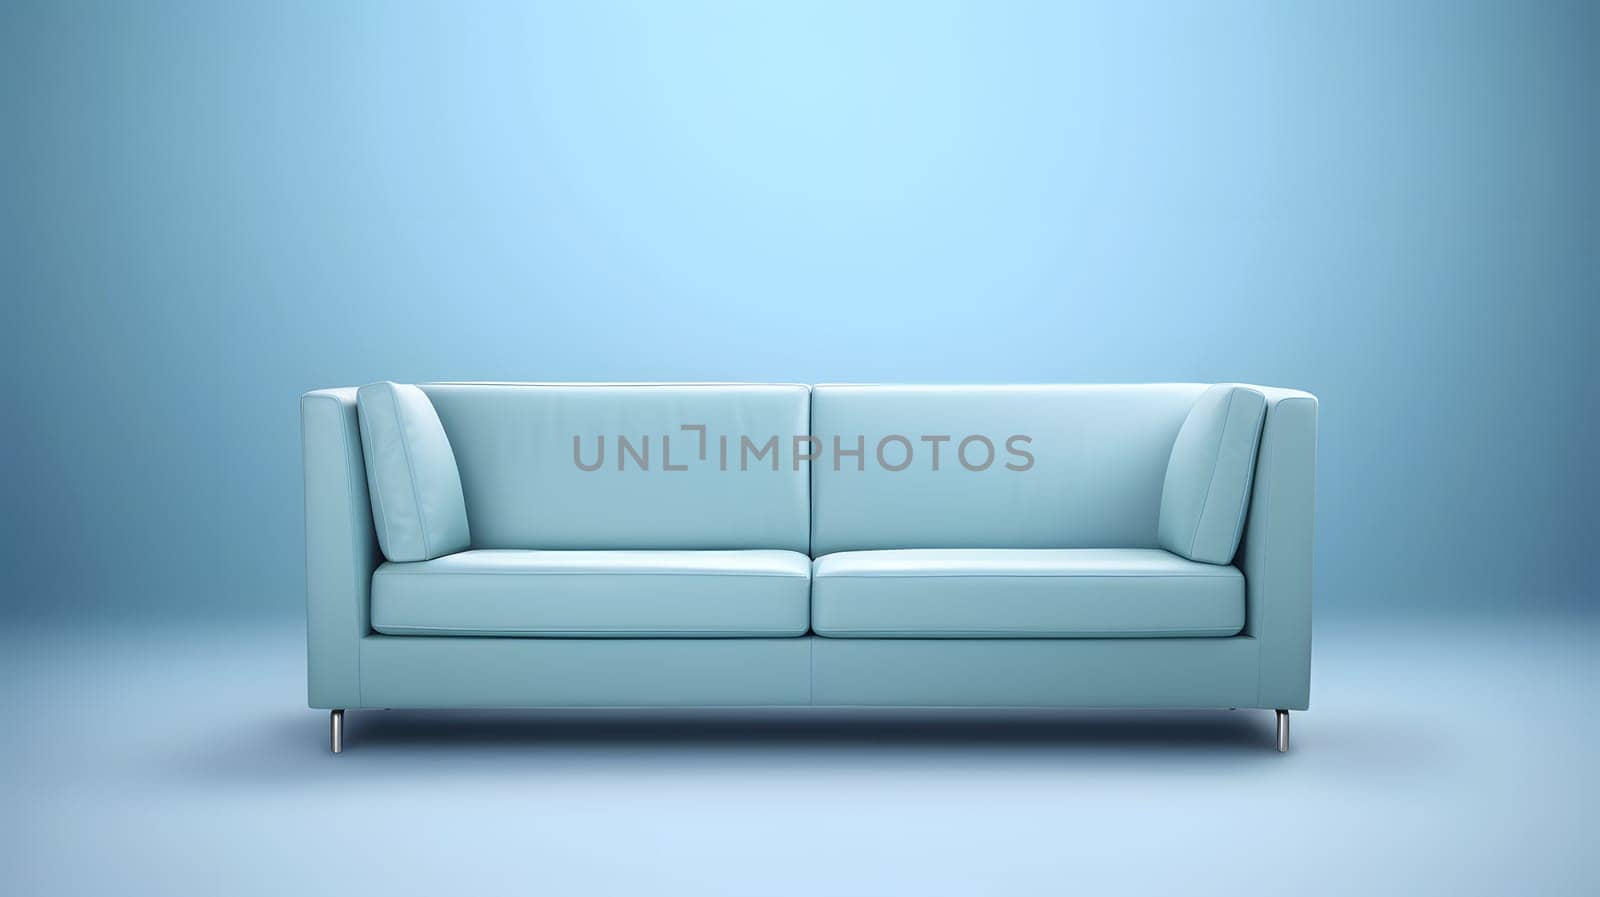 Minimalist light-blue sofa on light blue background. Neural network generated in May 2023. Not based on any actual scene or pattern.